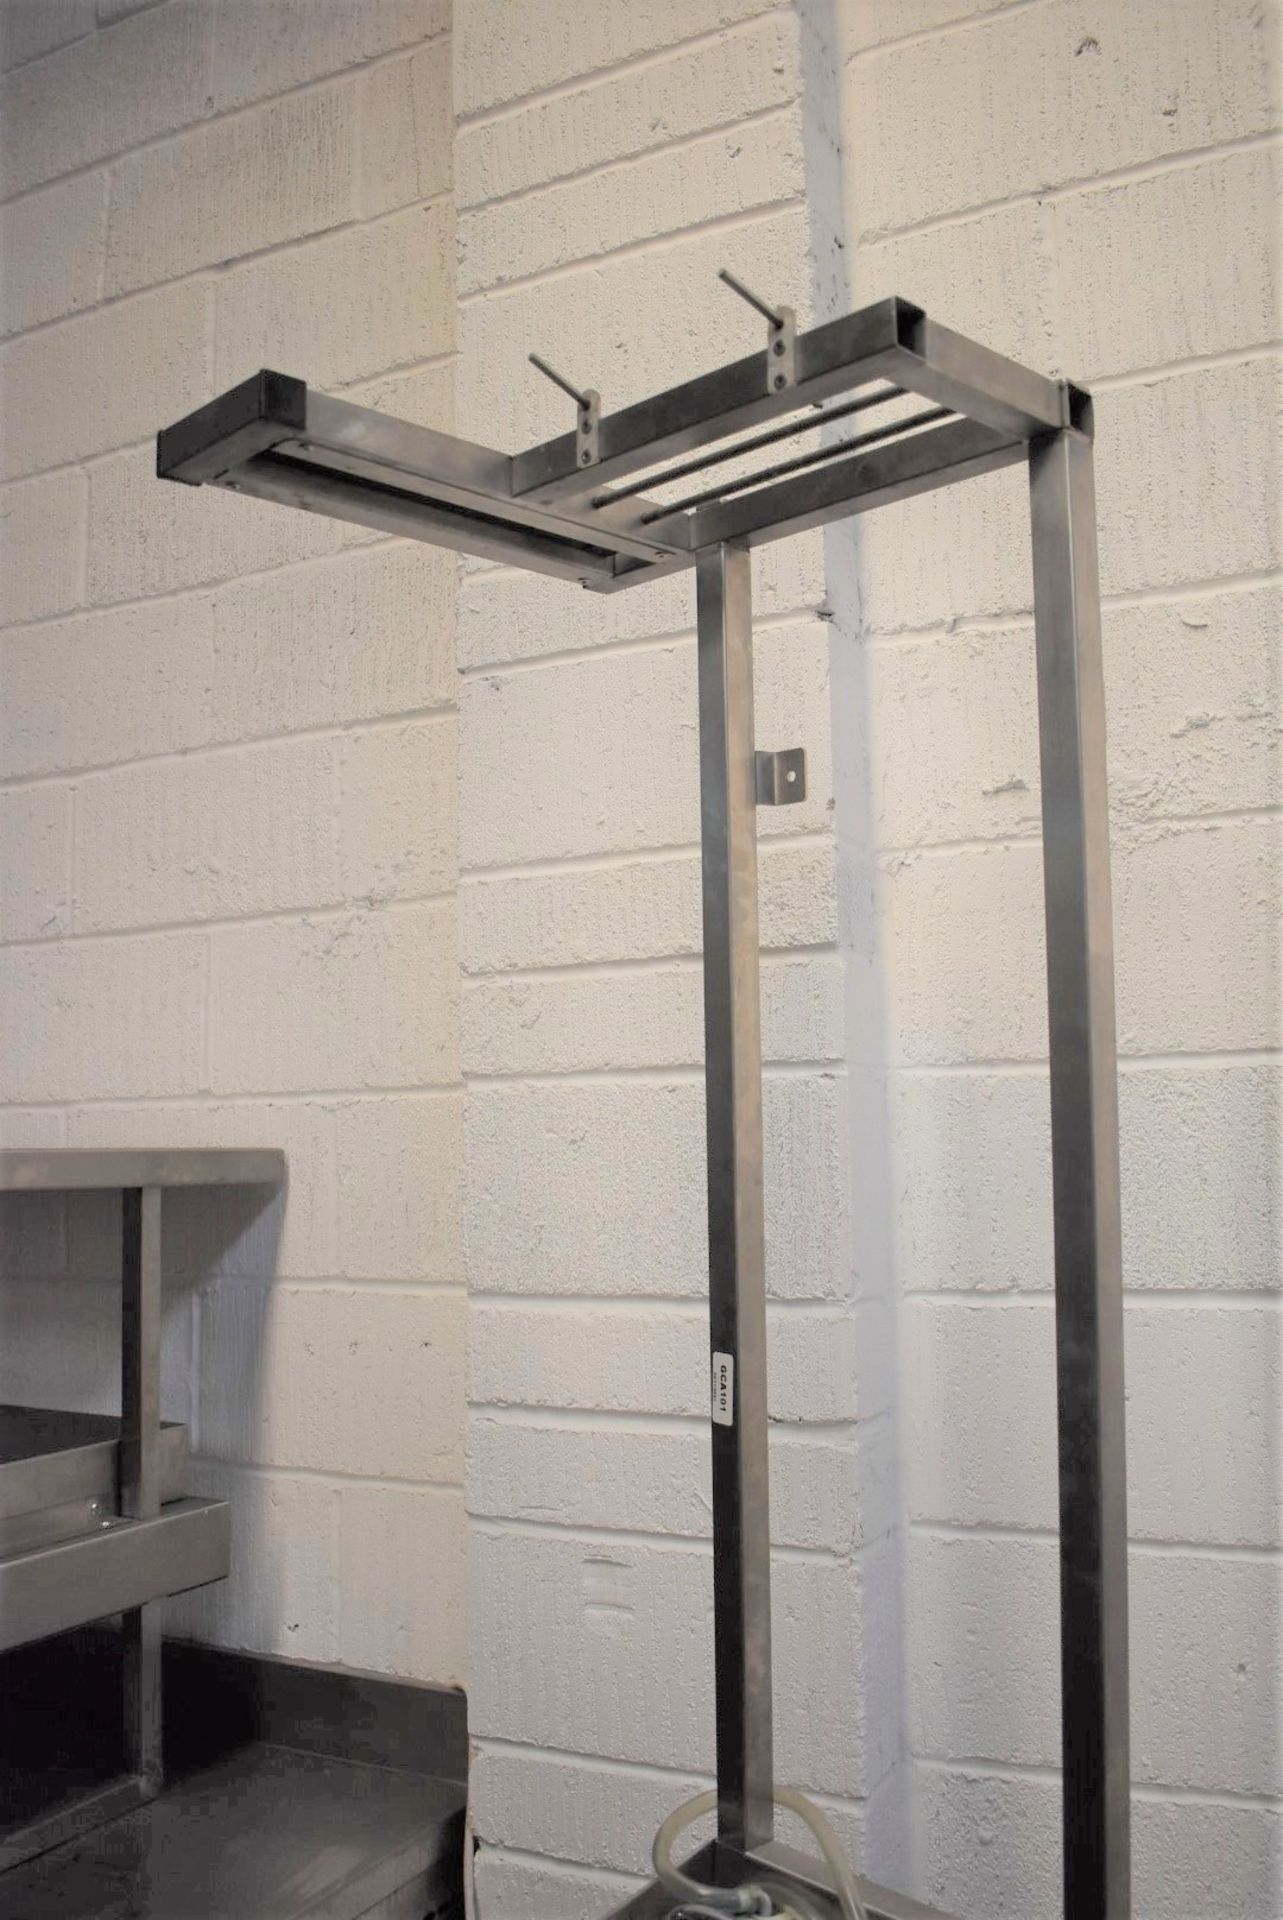 1 x Stainless Steel Commercial Kitchen Janitorial Mop / Cleaning Station - Dimensions: H187 x W33 - Image 2 of 6